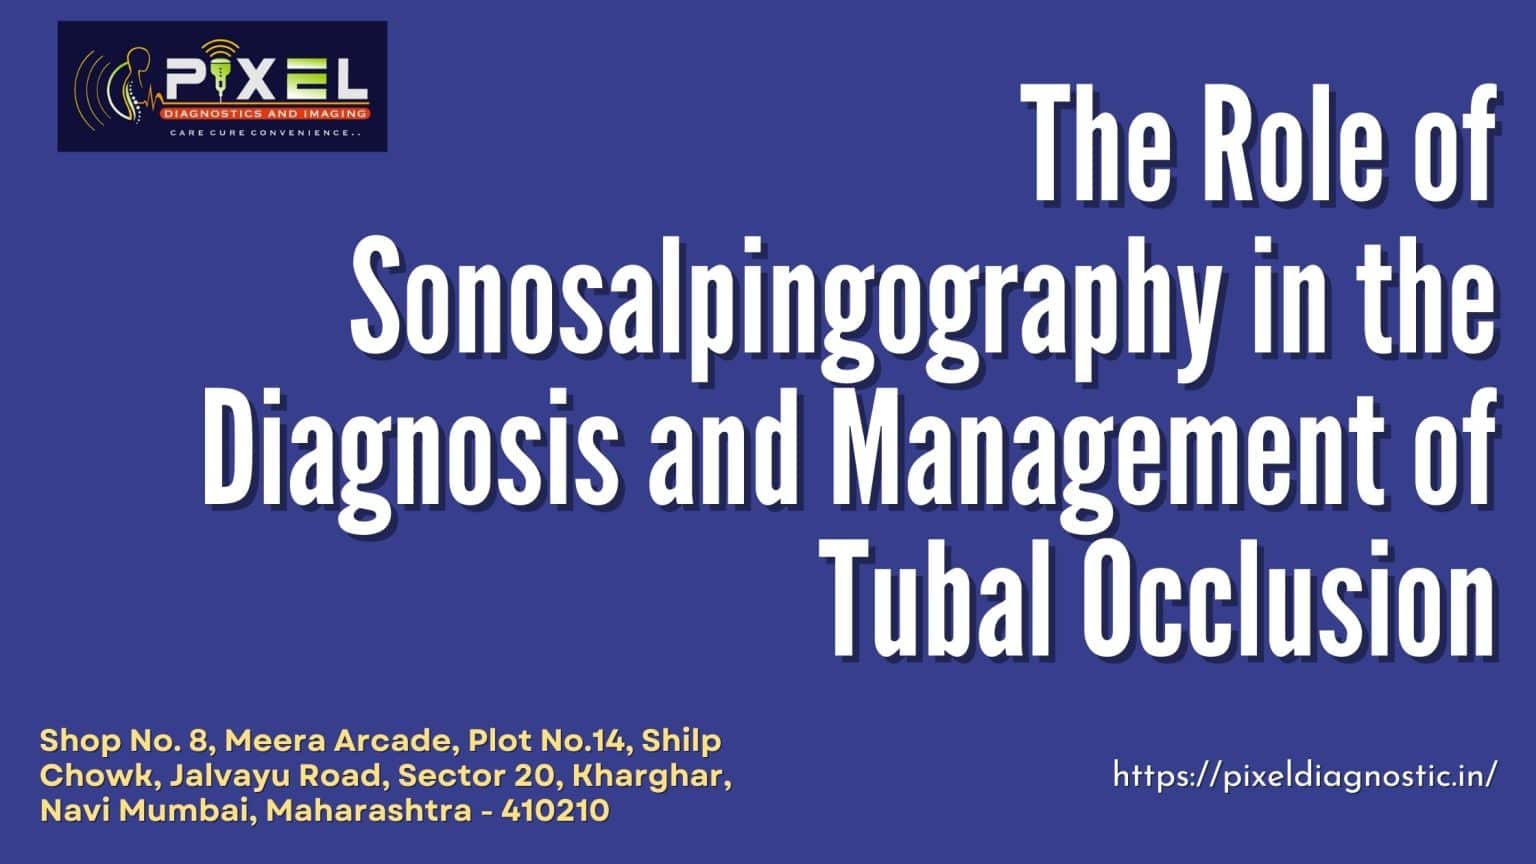 The Role of Sonosalpingography in the Diagnosis and Management of Tubal Occlusion